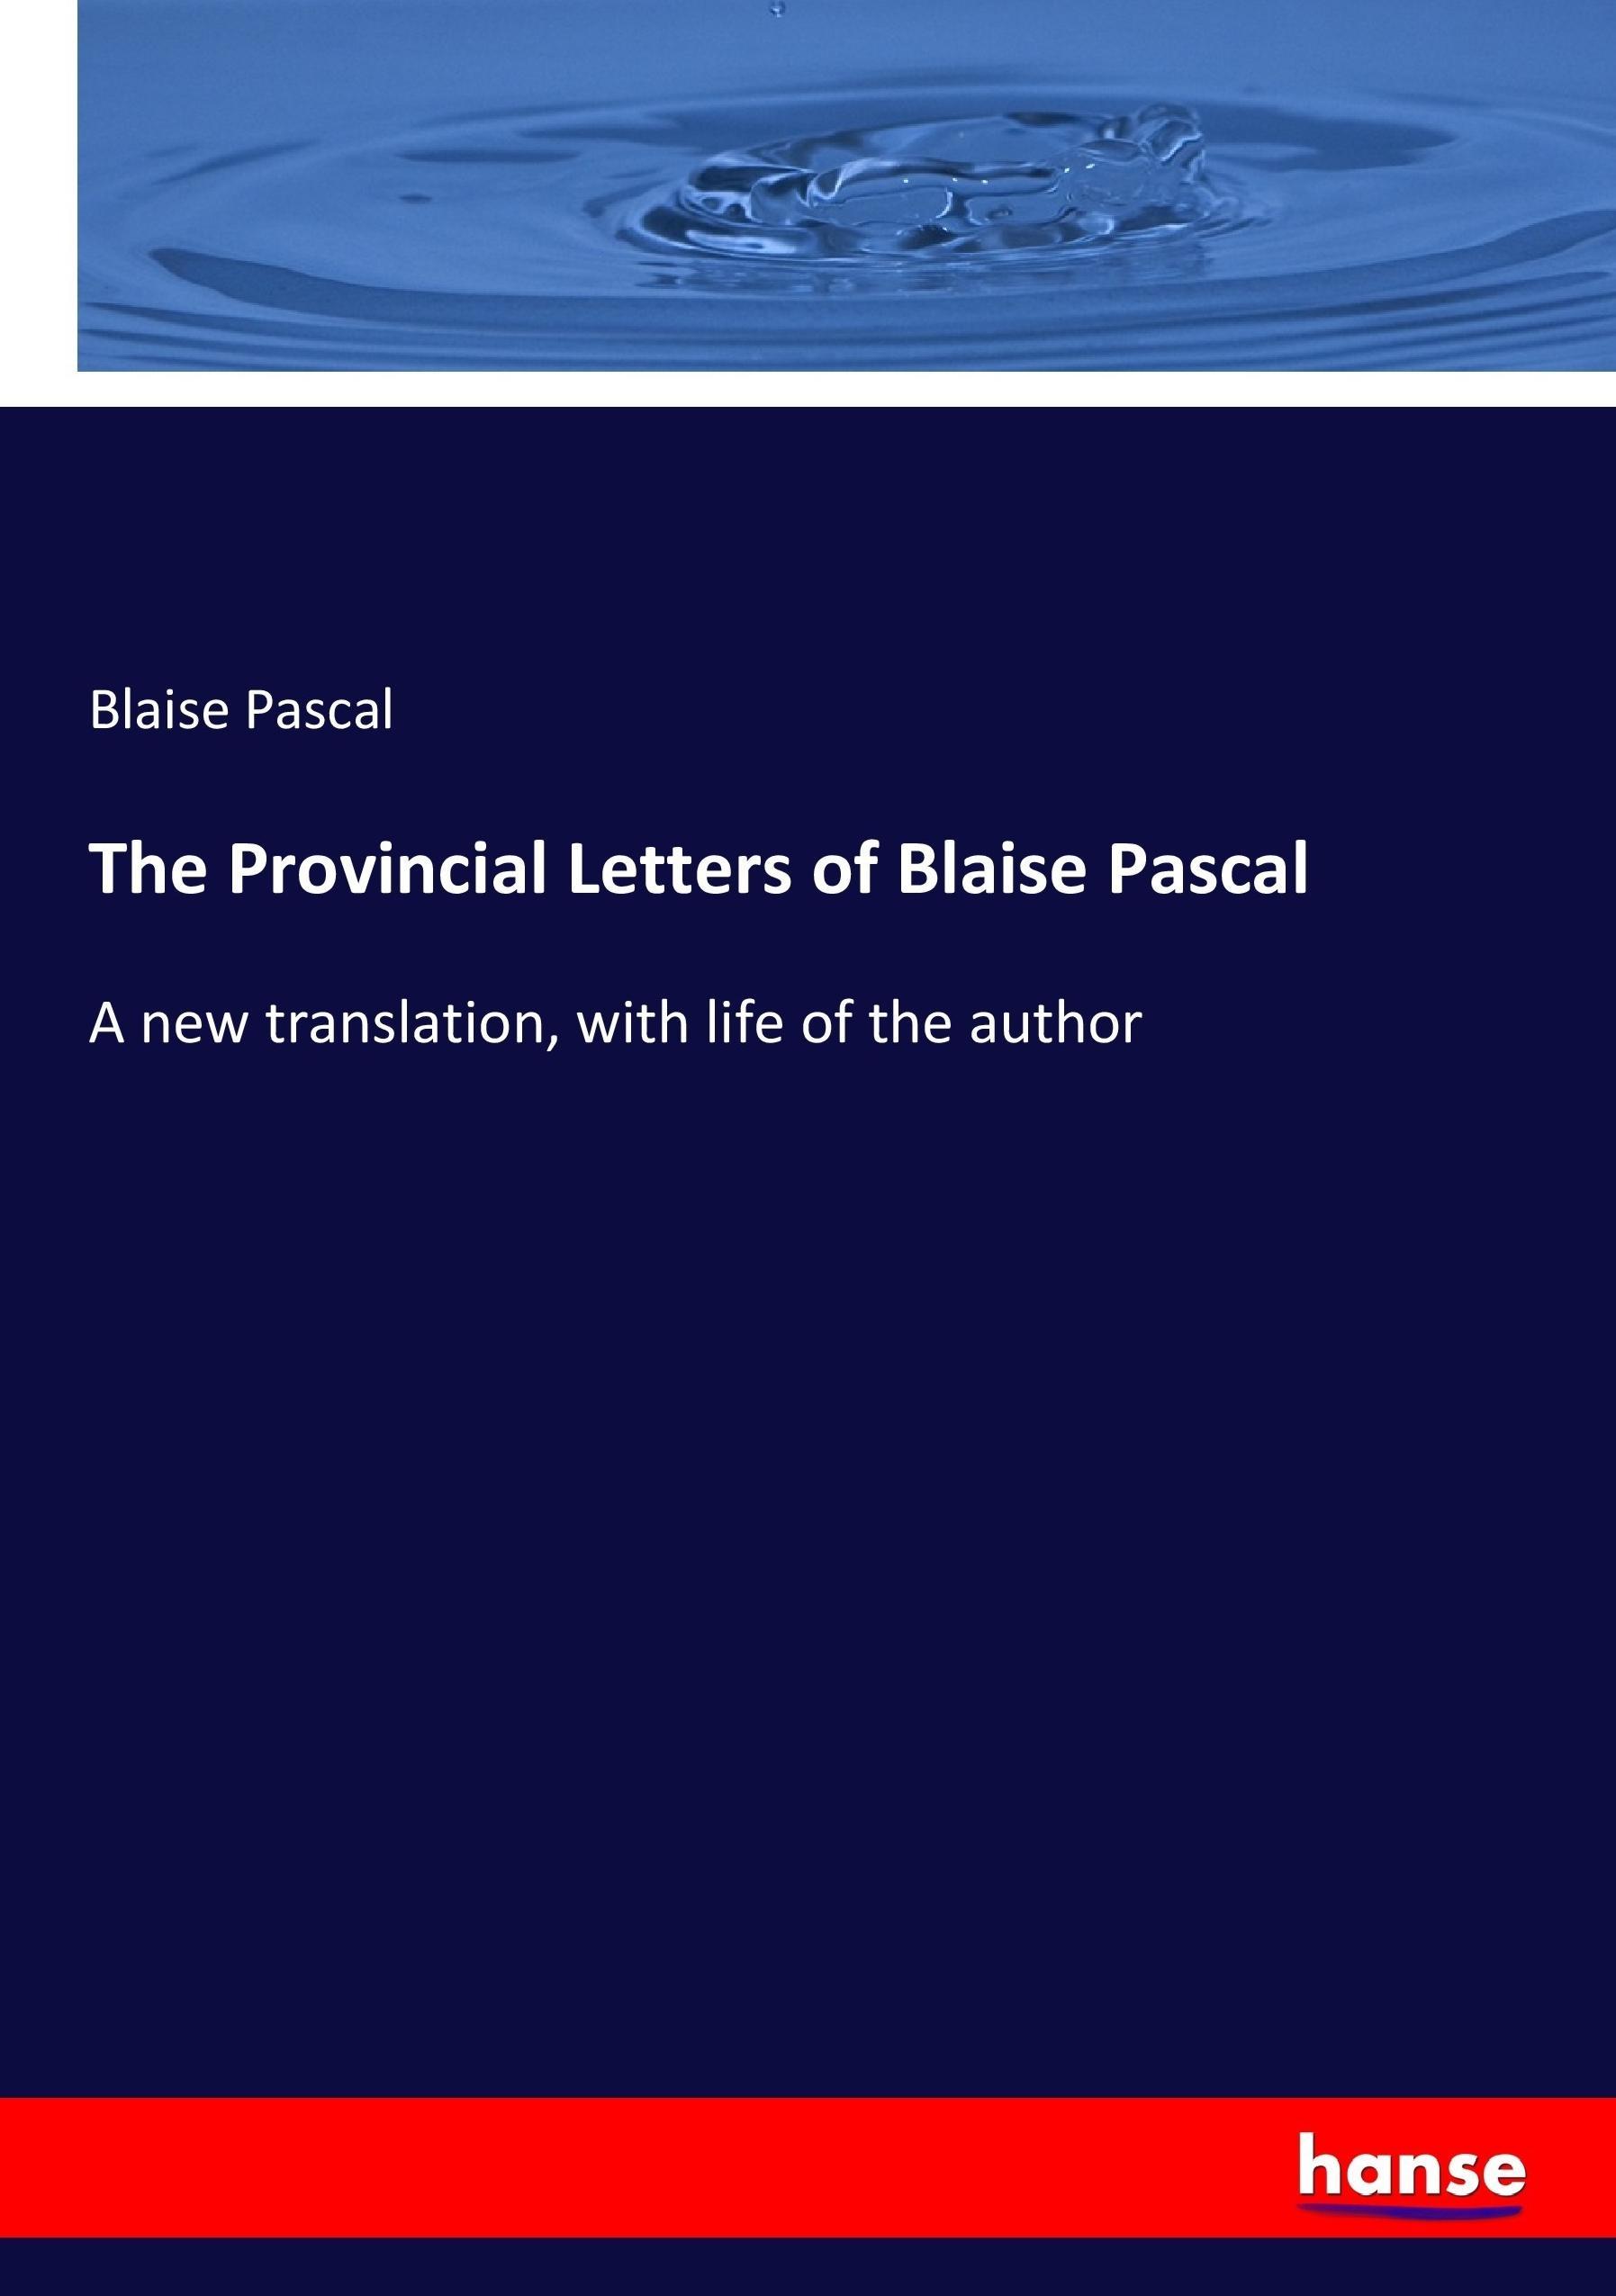 The Provincial Letters of Blaise Pascal | A new translation, with life of the author | Blaise Pascal | Taschenbuch | Paperback | 292 S. | Englisch | 2017 | hansebooks | EAN 9783337017361 - Pascal, Blaise